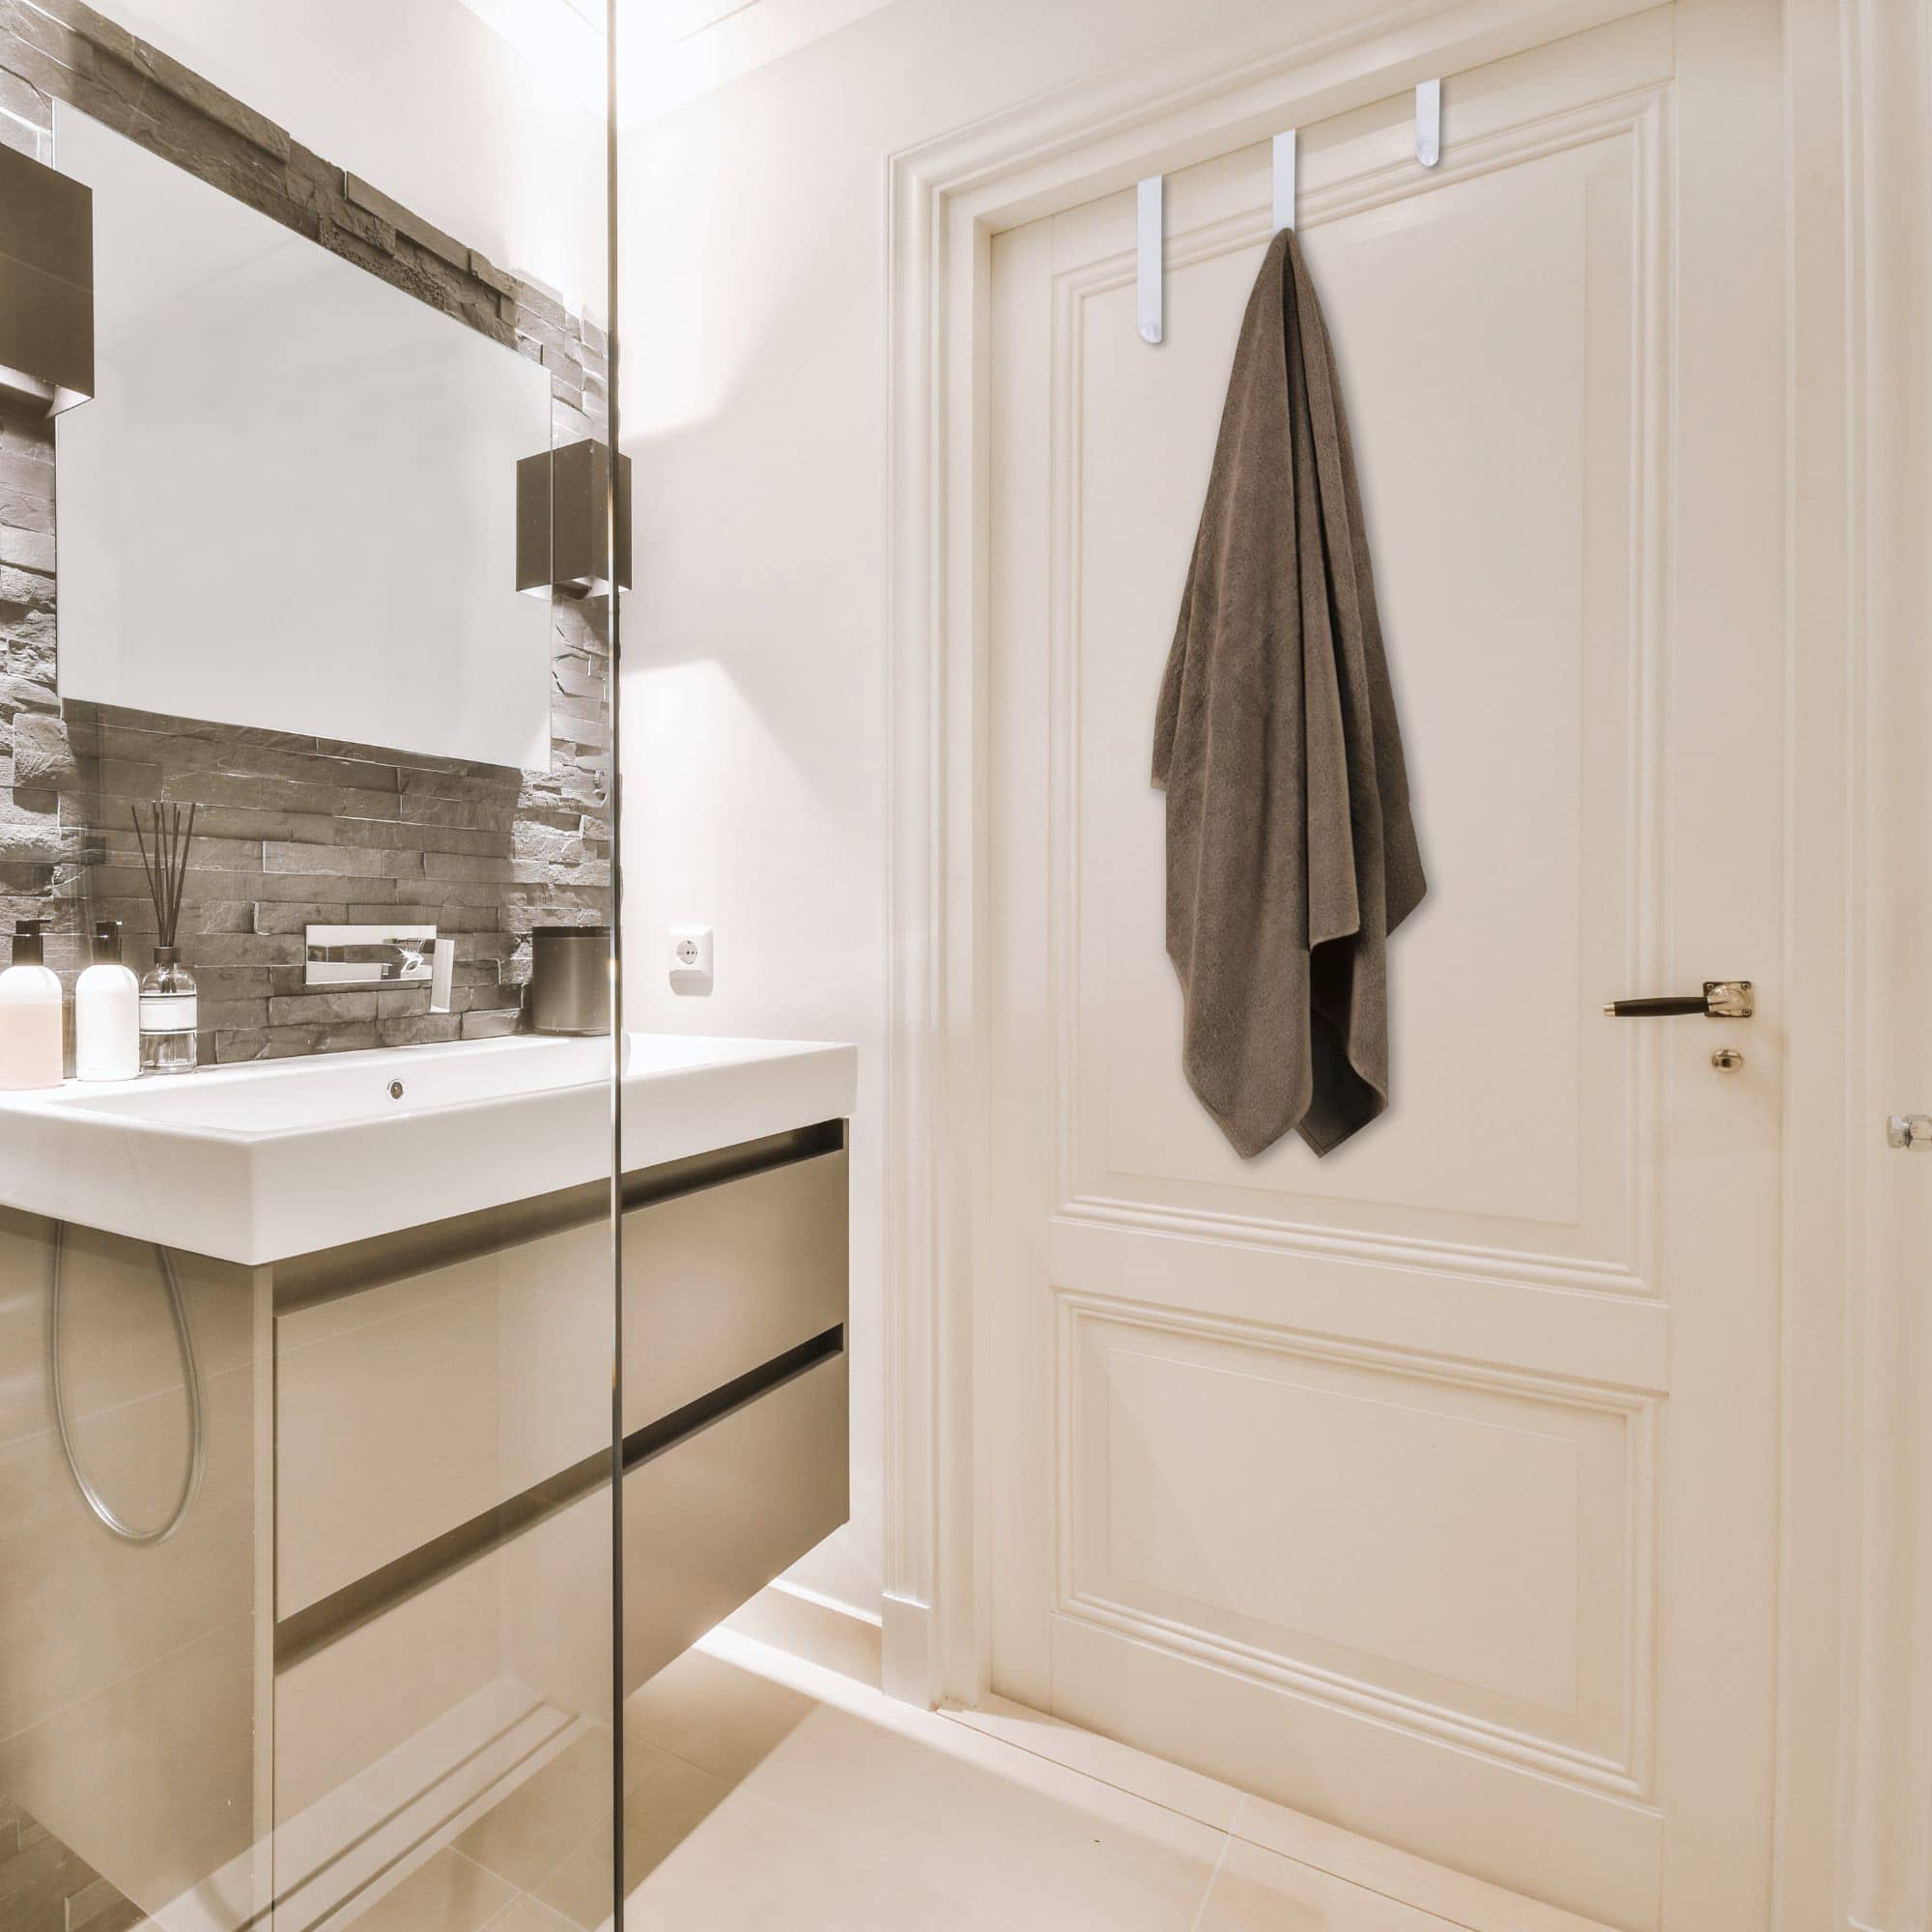 Elegant Bathroom Interior with a Set of White Over-the-Door Hooks Holding a Towel on a Classic White Door, Showcasing a Modern Vanity and Reflective Glass Shower.